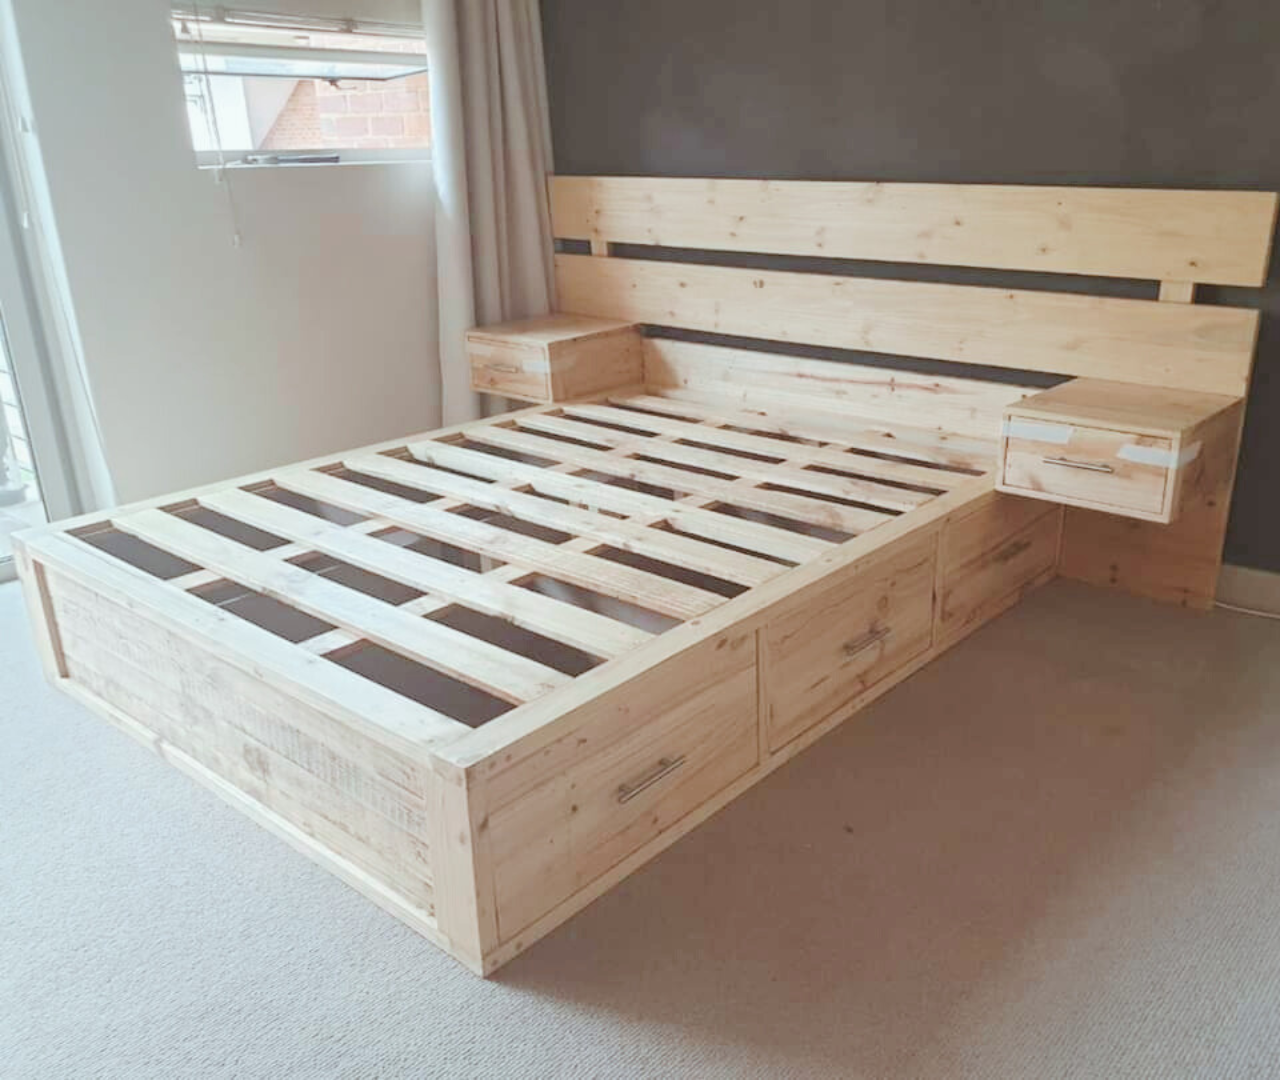 Wooden Floating bed with headboard and floating side tables